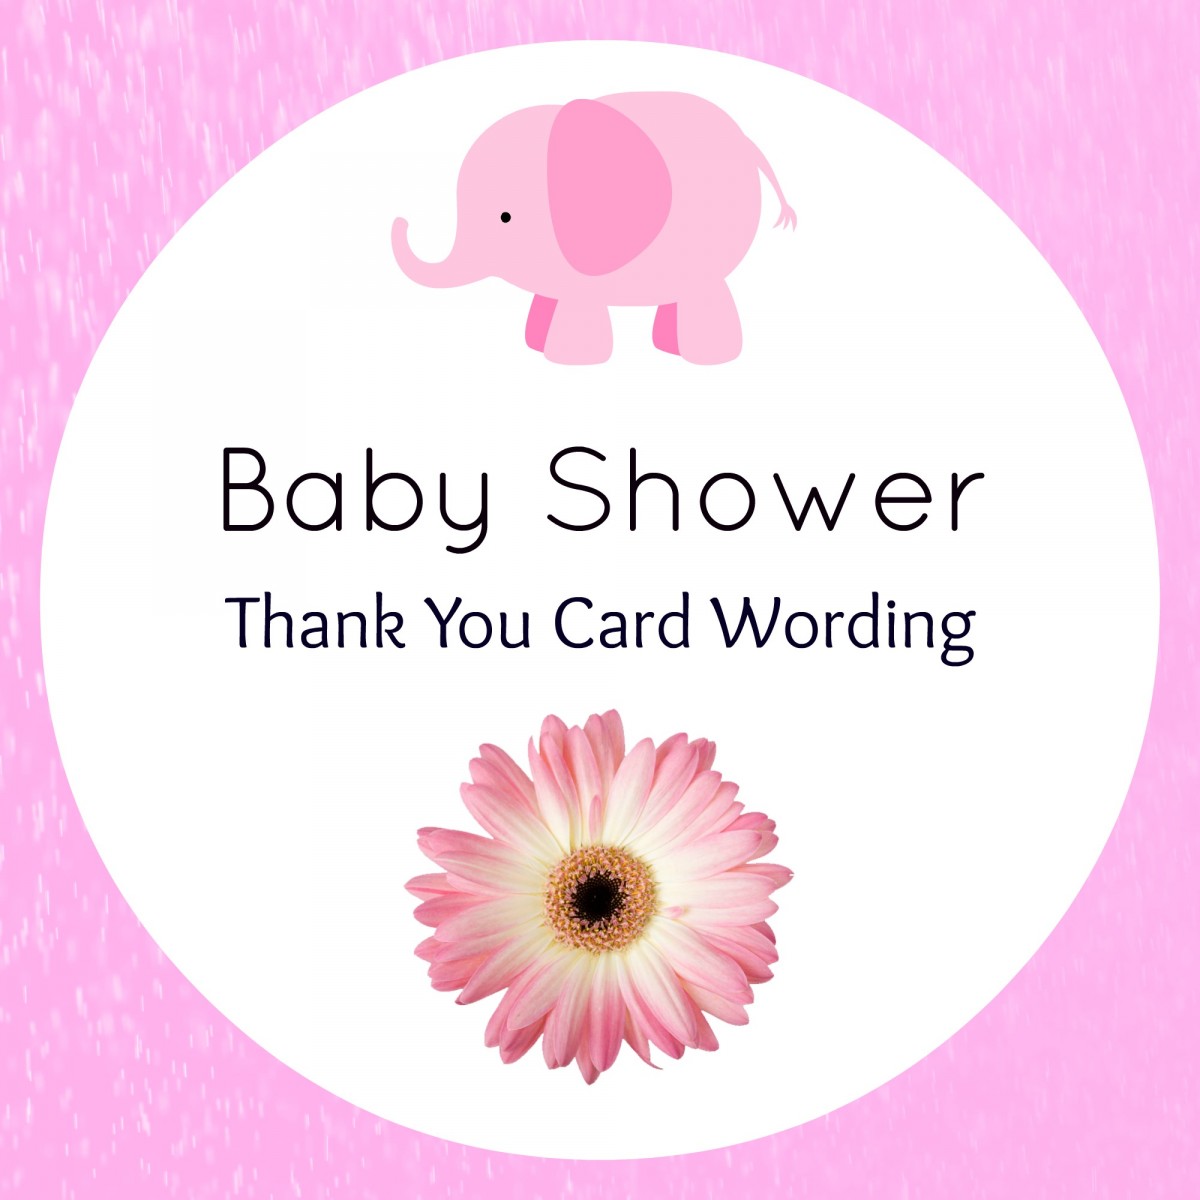 Full Size of Baby Shower:72+ Rousing Baby Shower Thank You Cards Picture Ideas Baby Shower Thank You Cards Unique Baby Shower Juegos Para Baby Shower Actividades Baby Shower Bebe Baby Shower Best Shows For Babies Baby Shower Pictures Baby Shower Thank You Card Wording